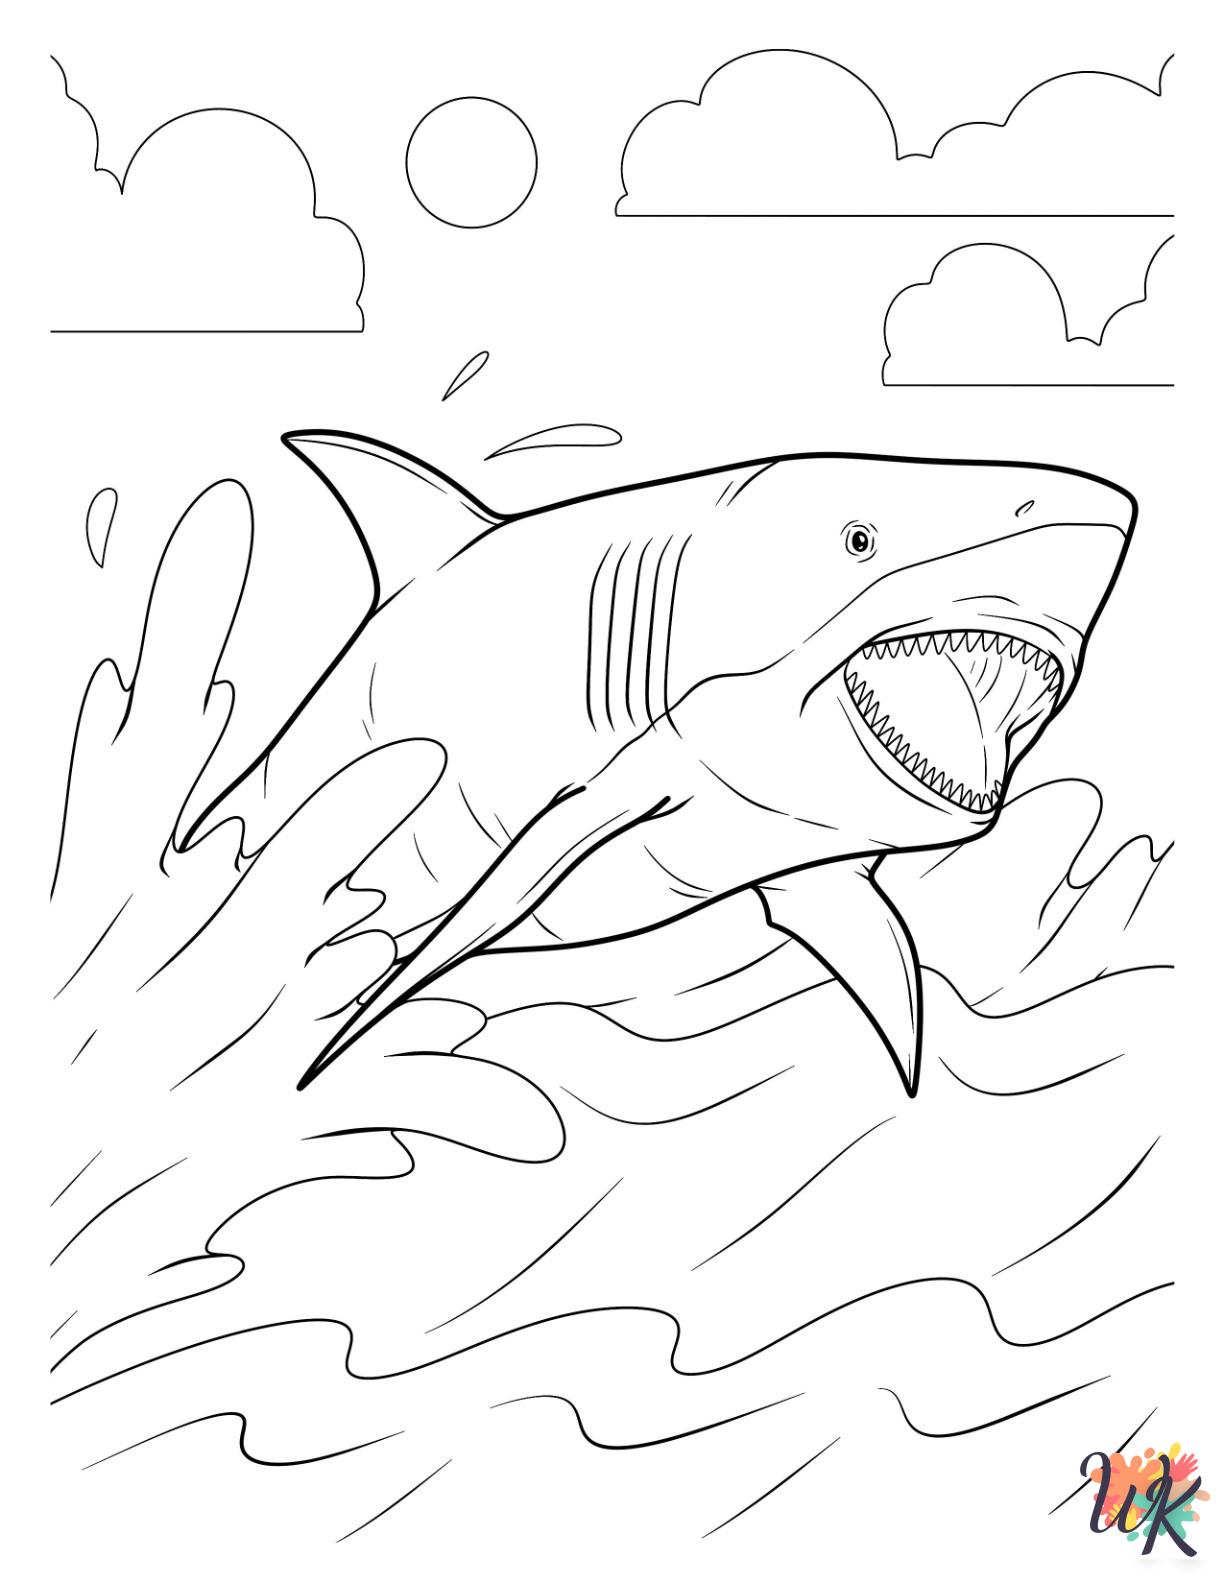 Shark coloring pages for adults pdf